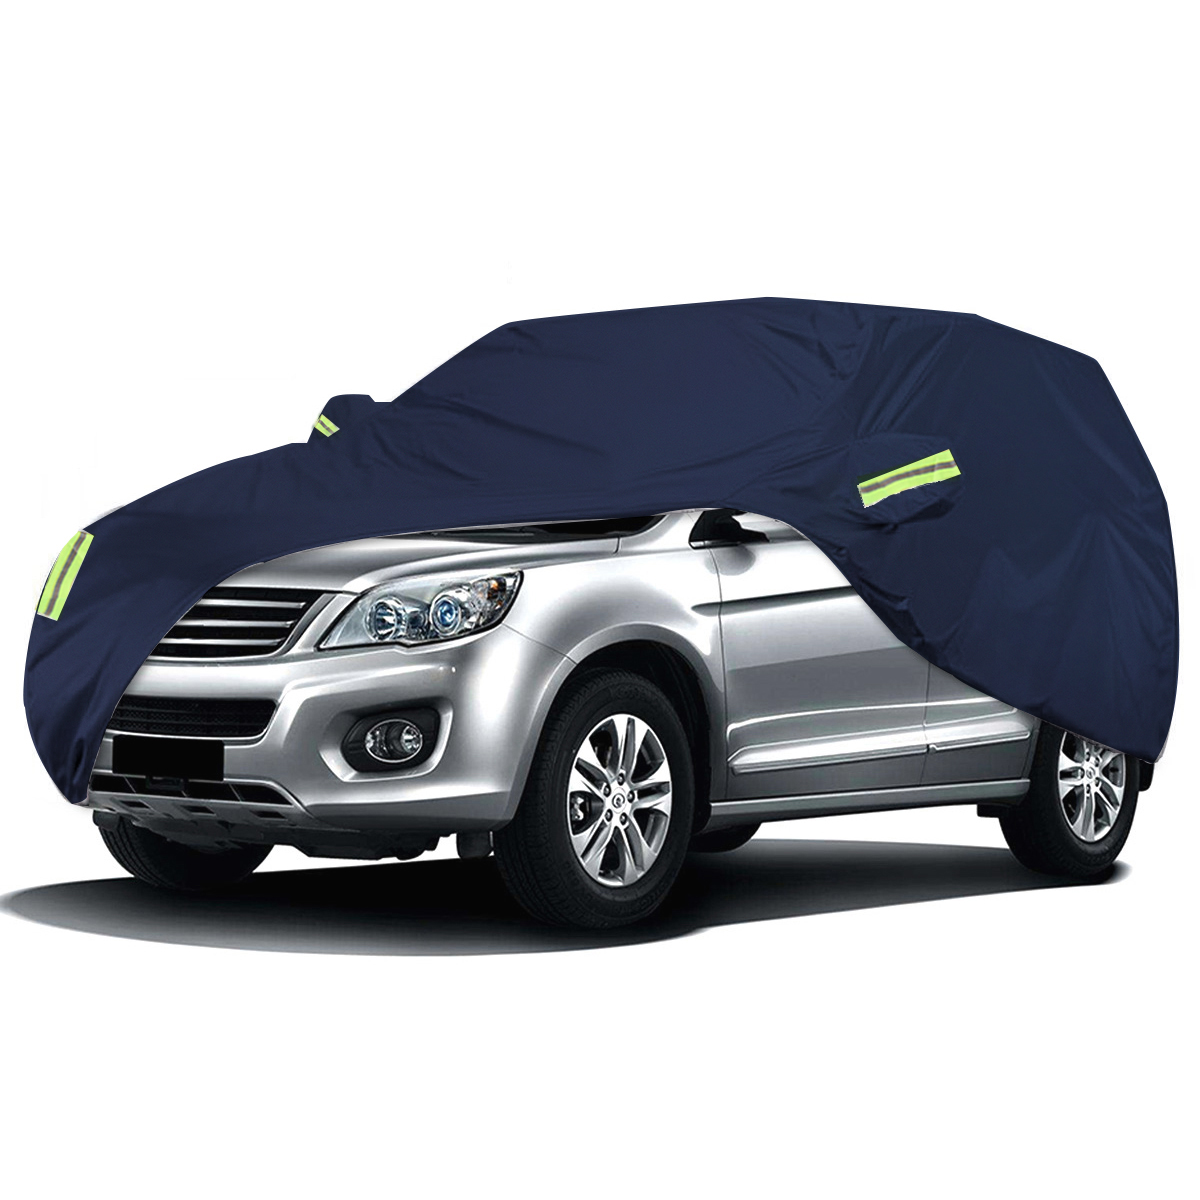 L 4.85X1.9X1.85M 210T Waterproof Full Car Cover Outdoor Dustproof Sunscreen Rain and Snow for SUV